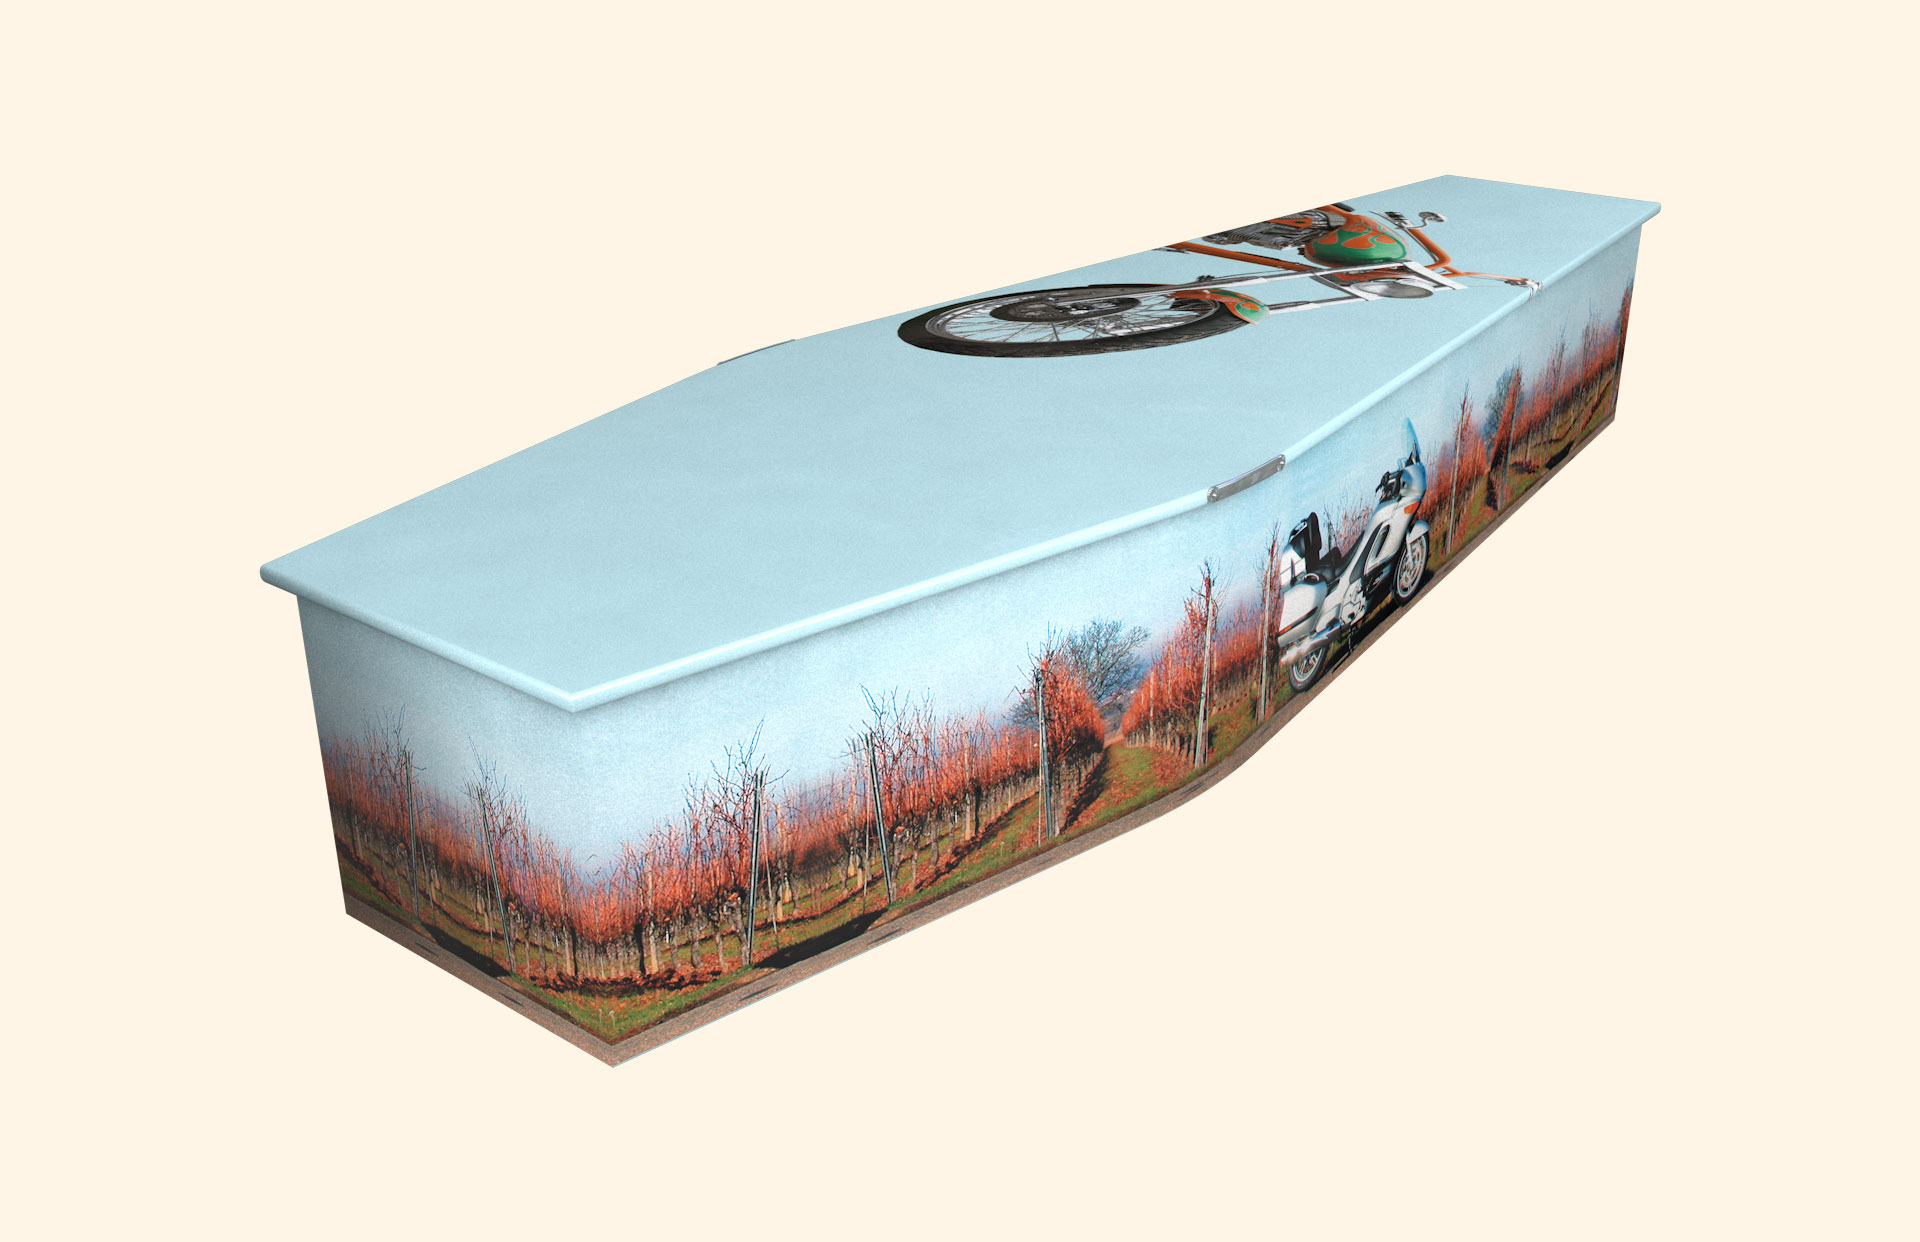 Easy Rider design on a traditional coffin